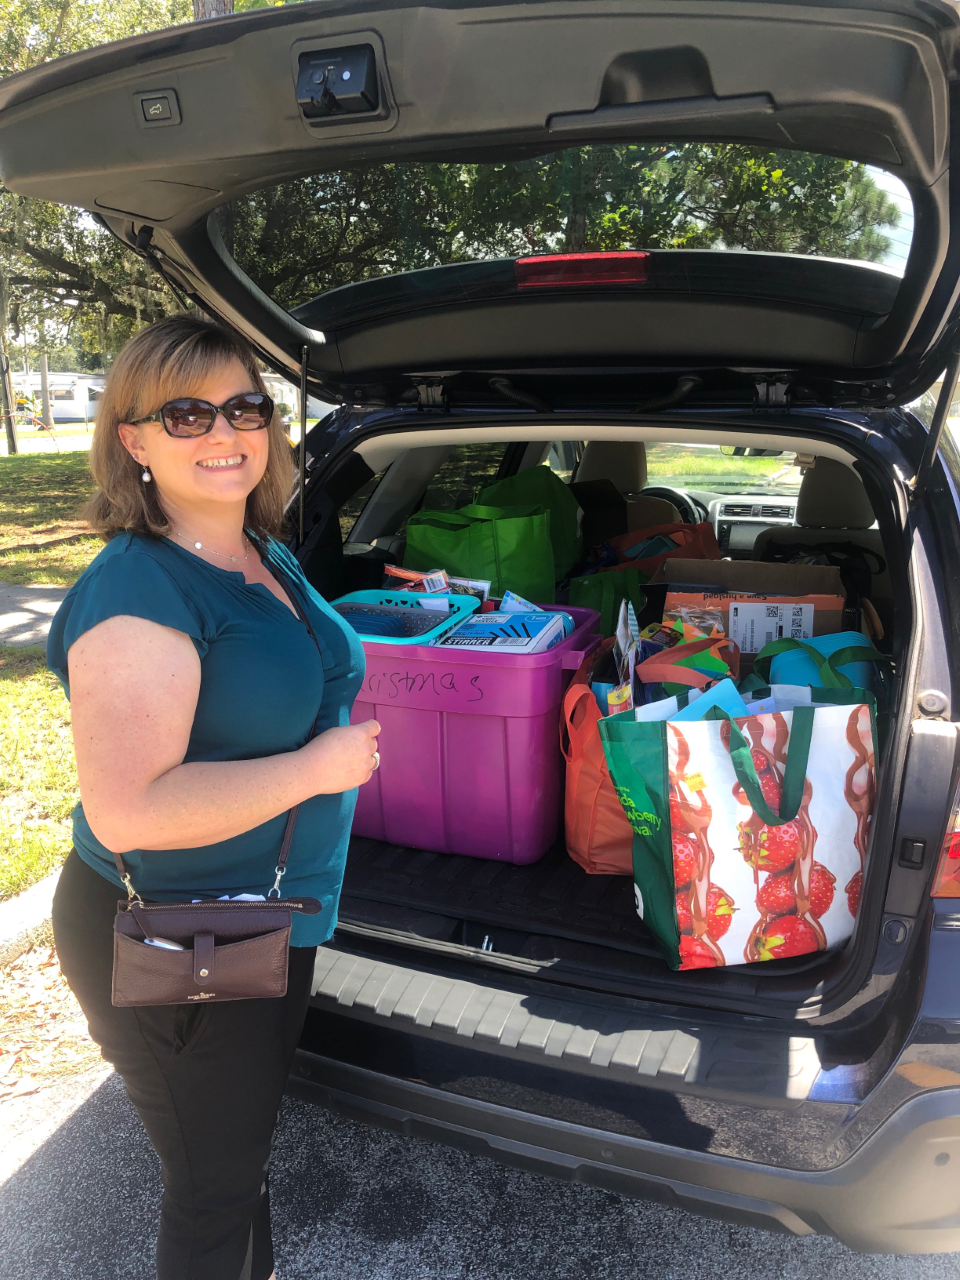 A month-long school supply collection was held at Elite DNA’s more than 20 offices across the state and gathered an array of essential classroom items.